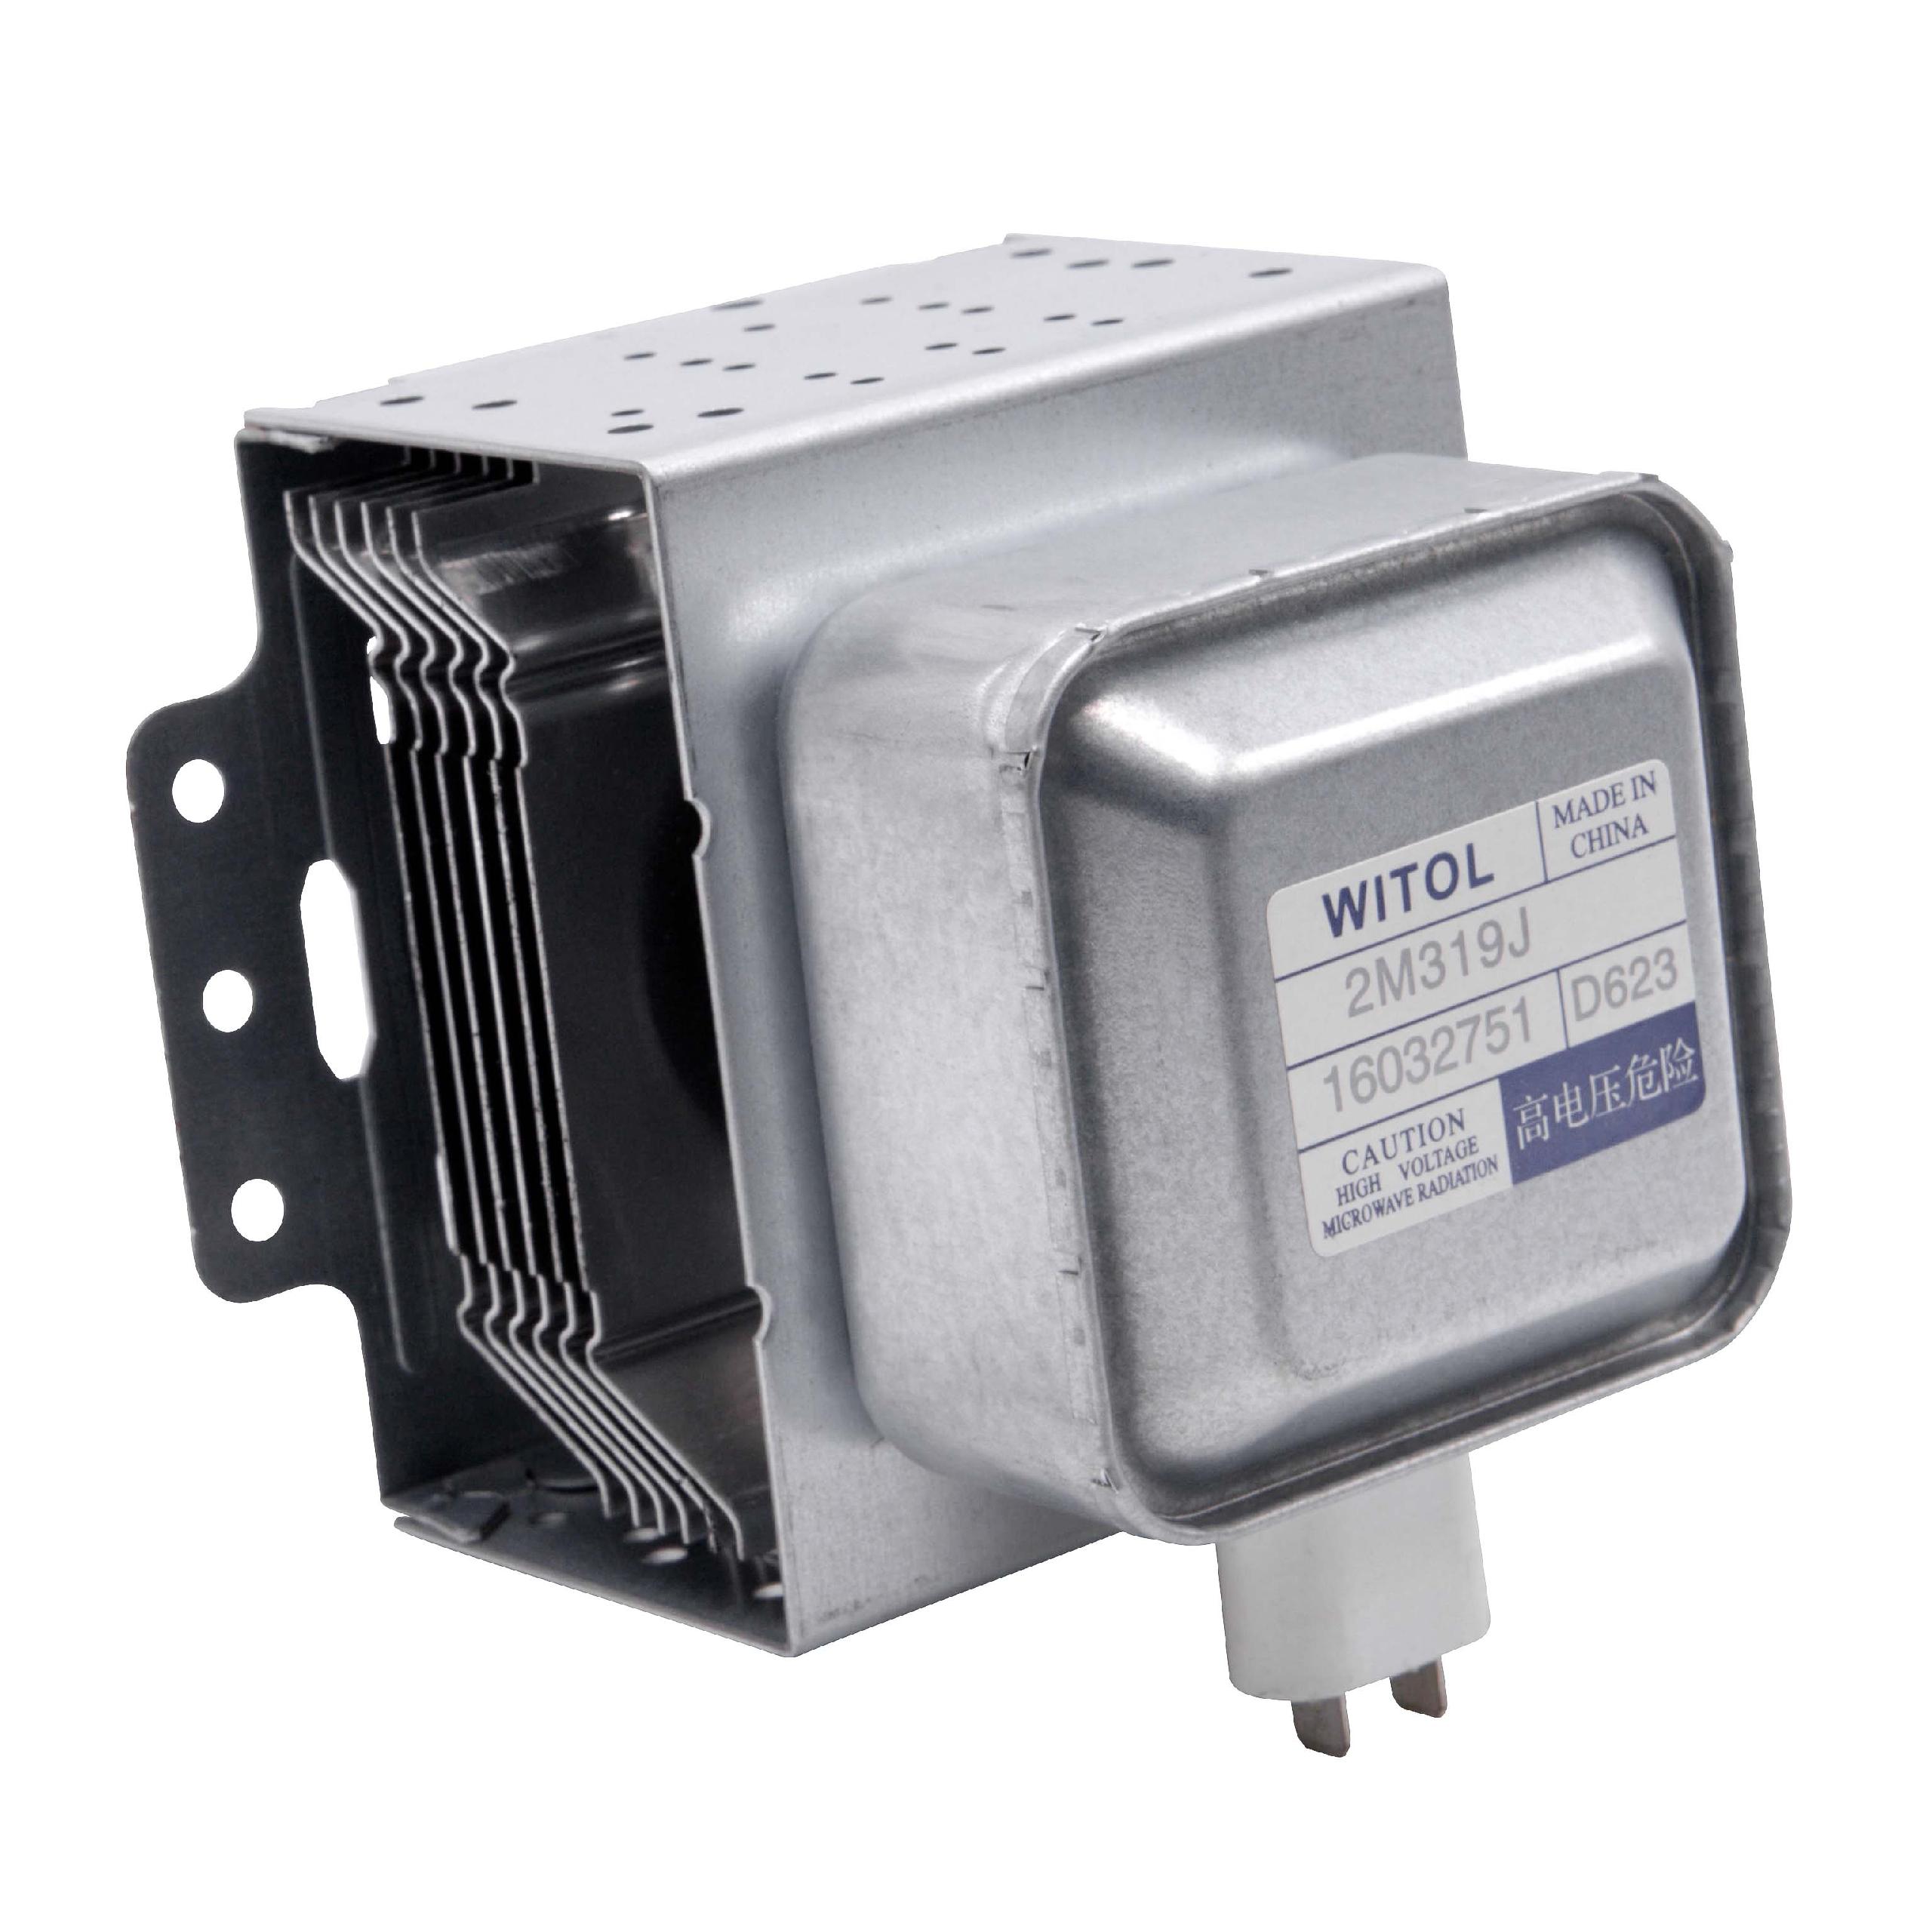 Magnetron replaces Witol 2M319J for Midea Microwave - 945 W